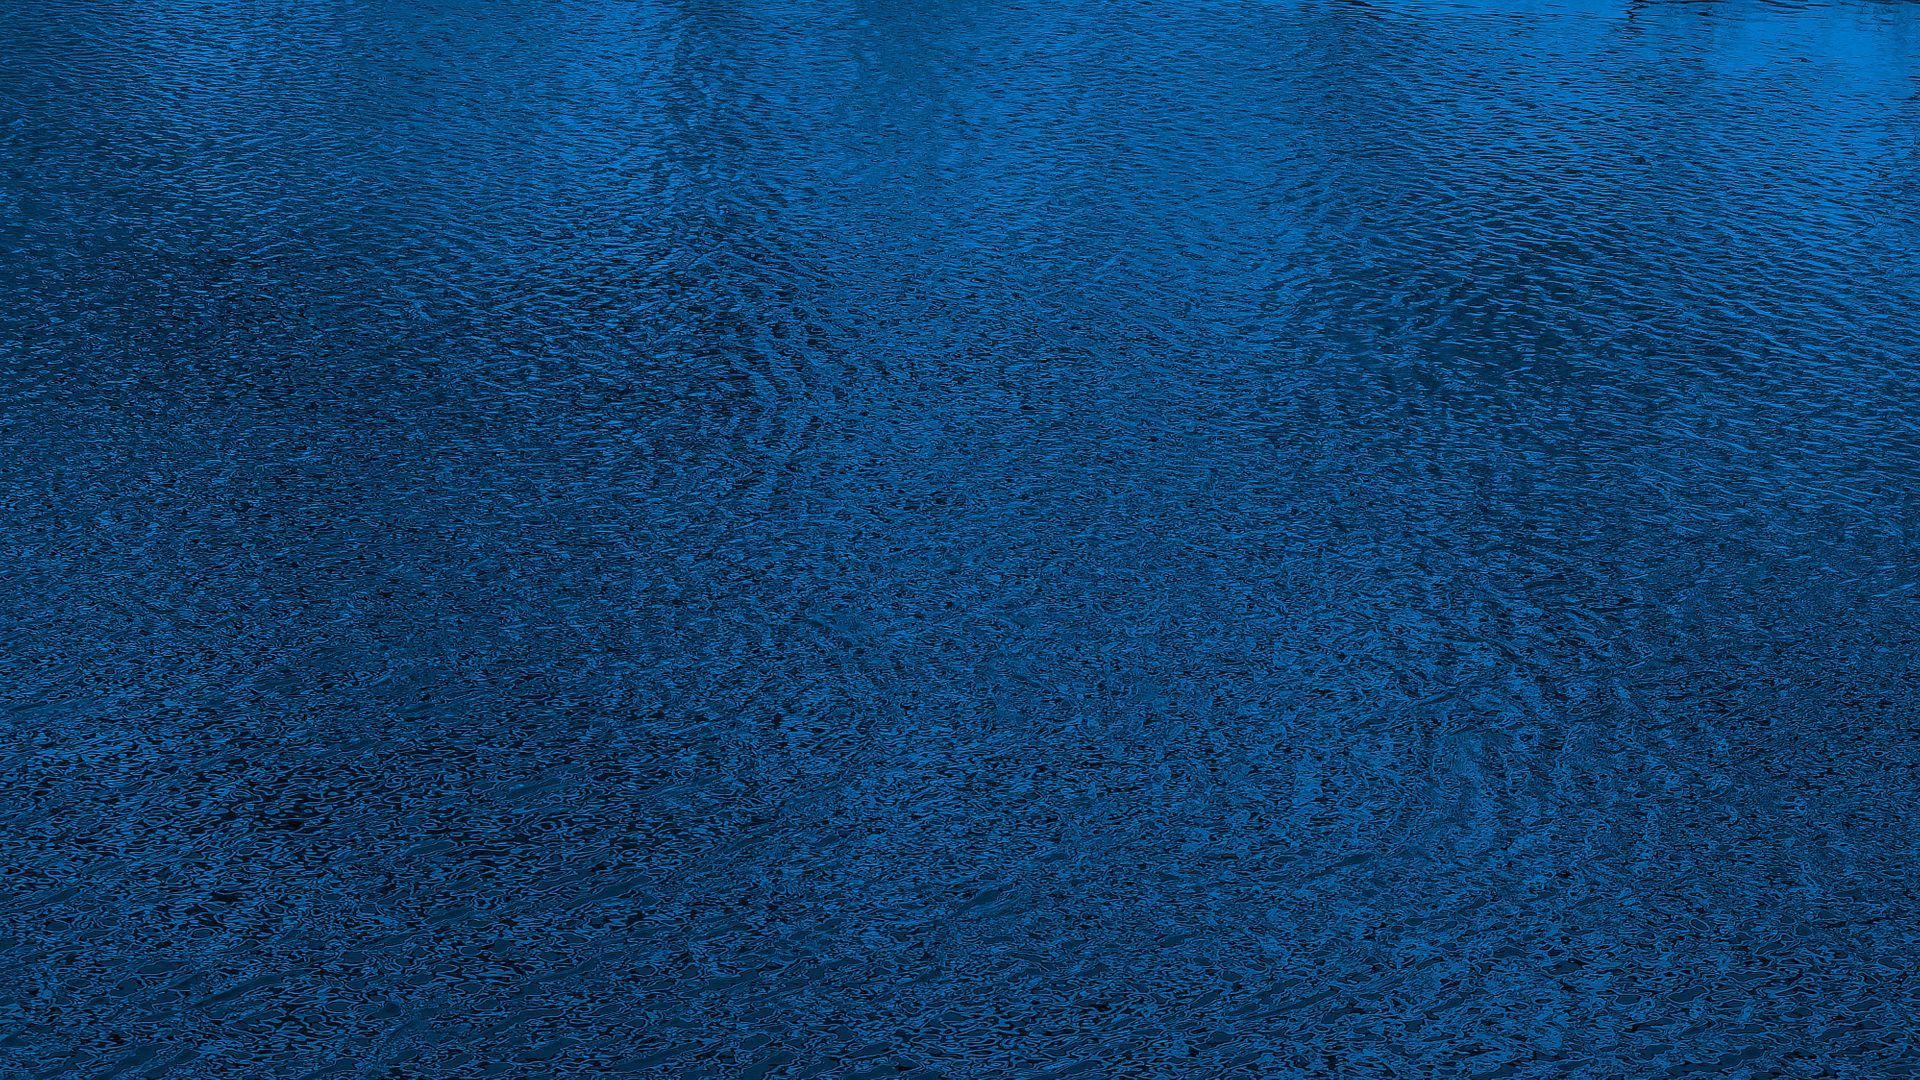 Water Backgrounds HD Free download 